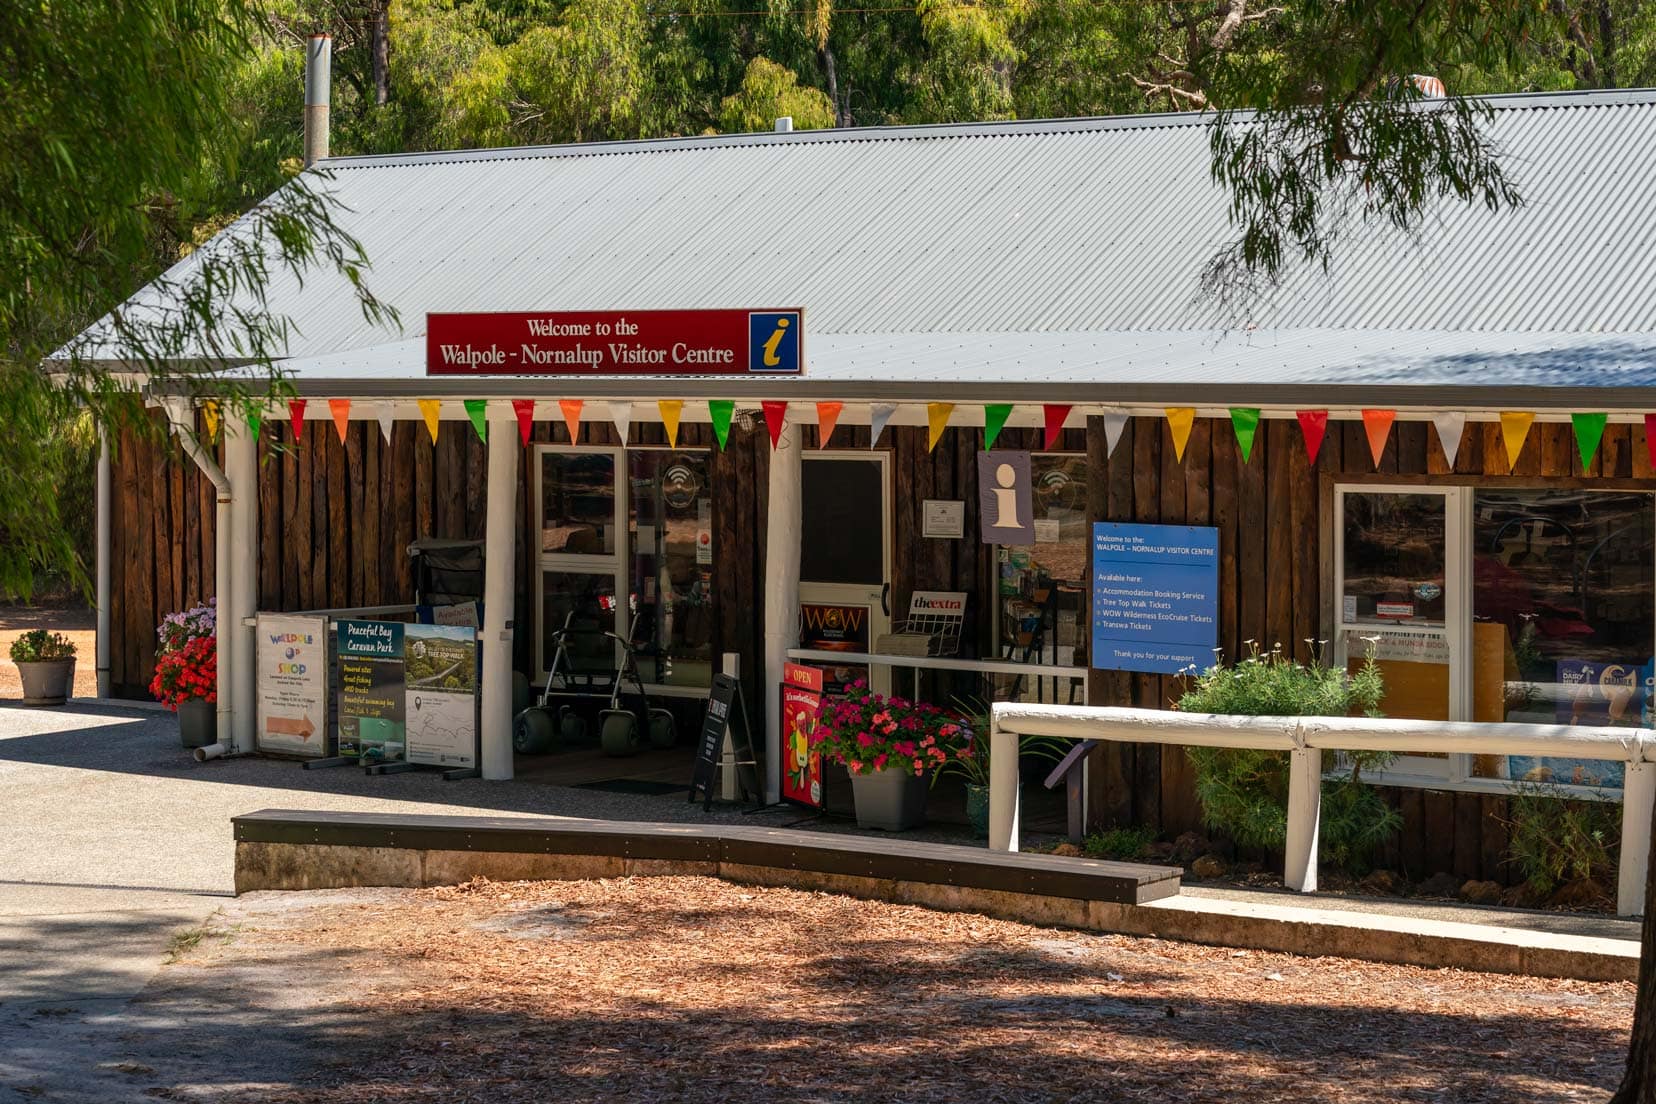 Walpole and Nornalup Visitor Centre building 